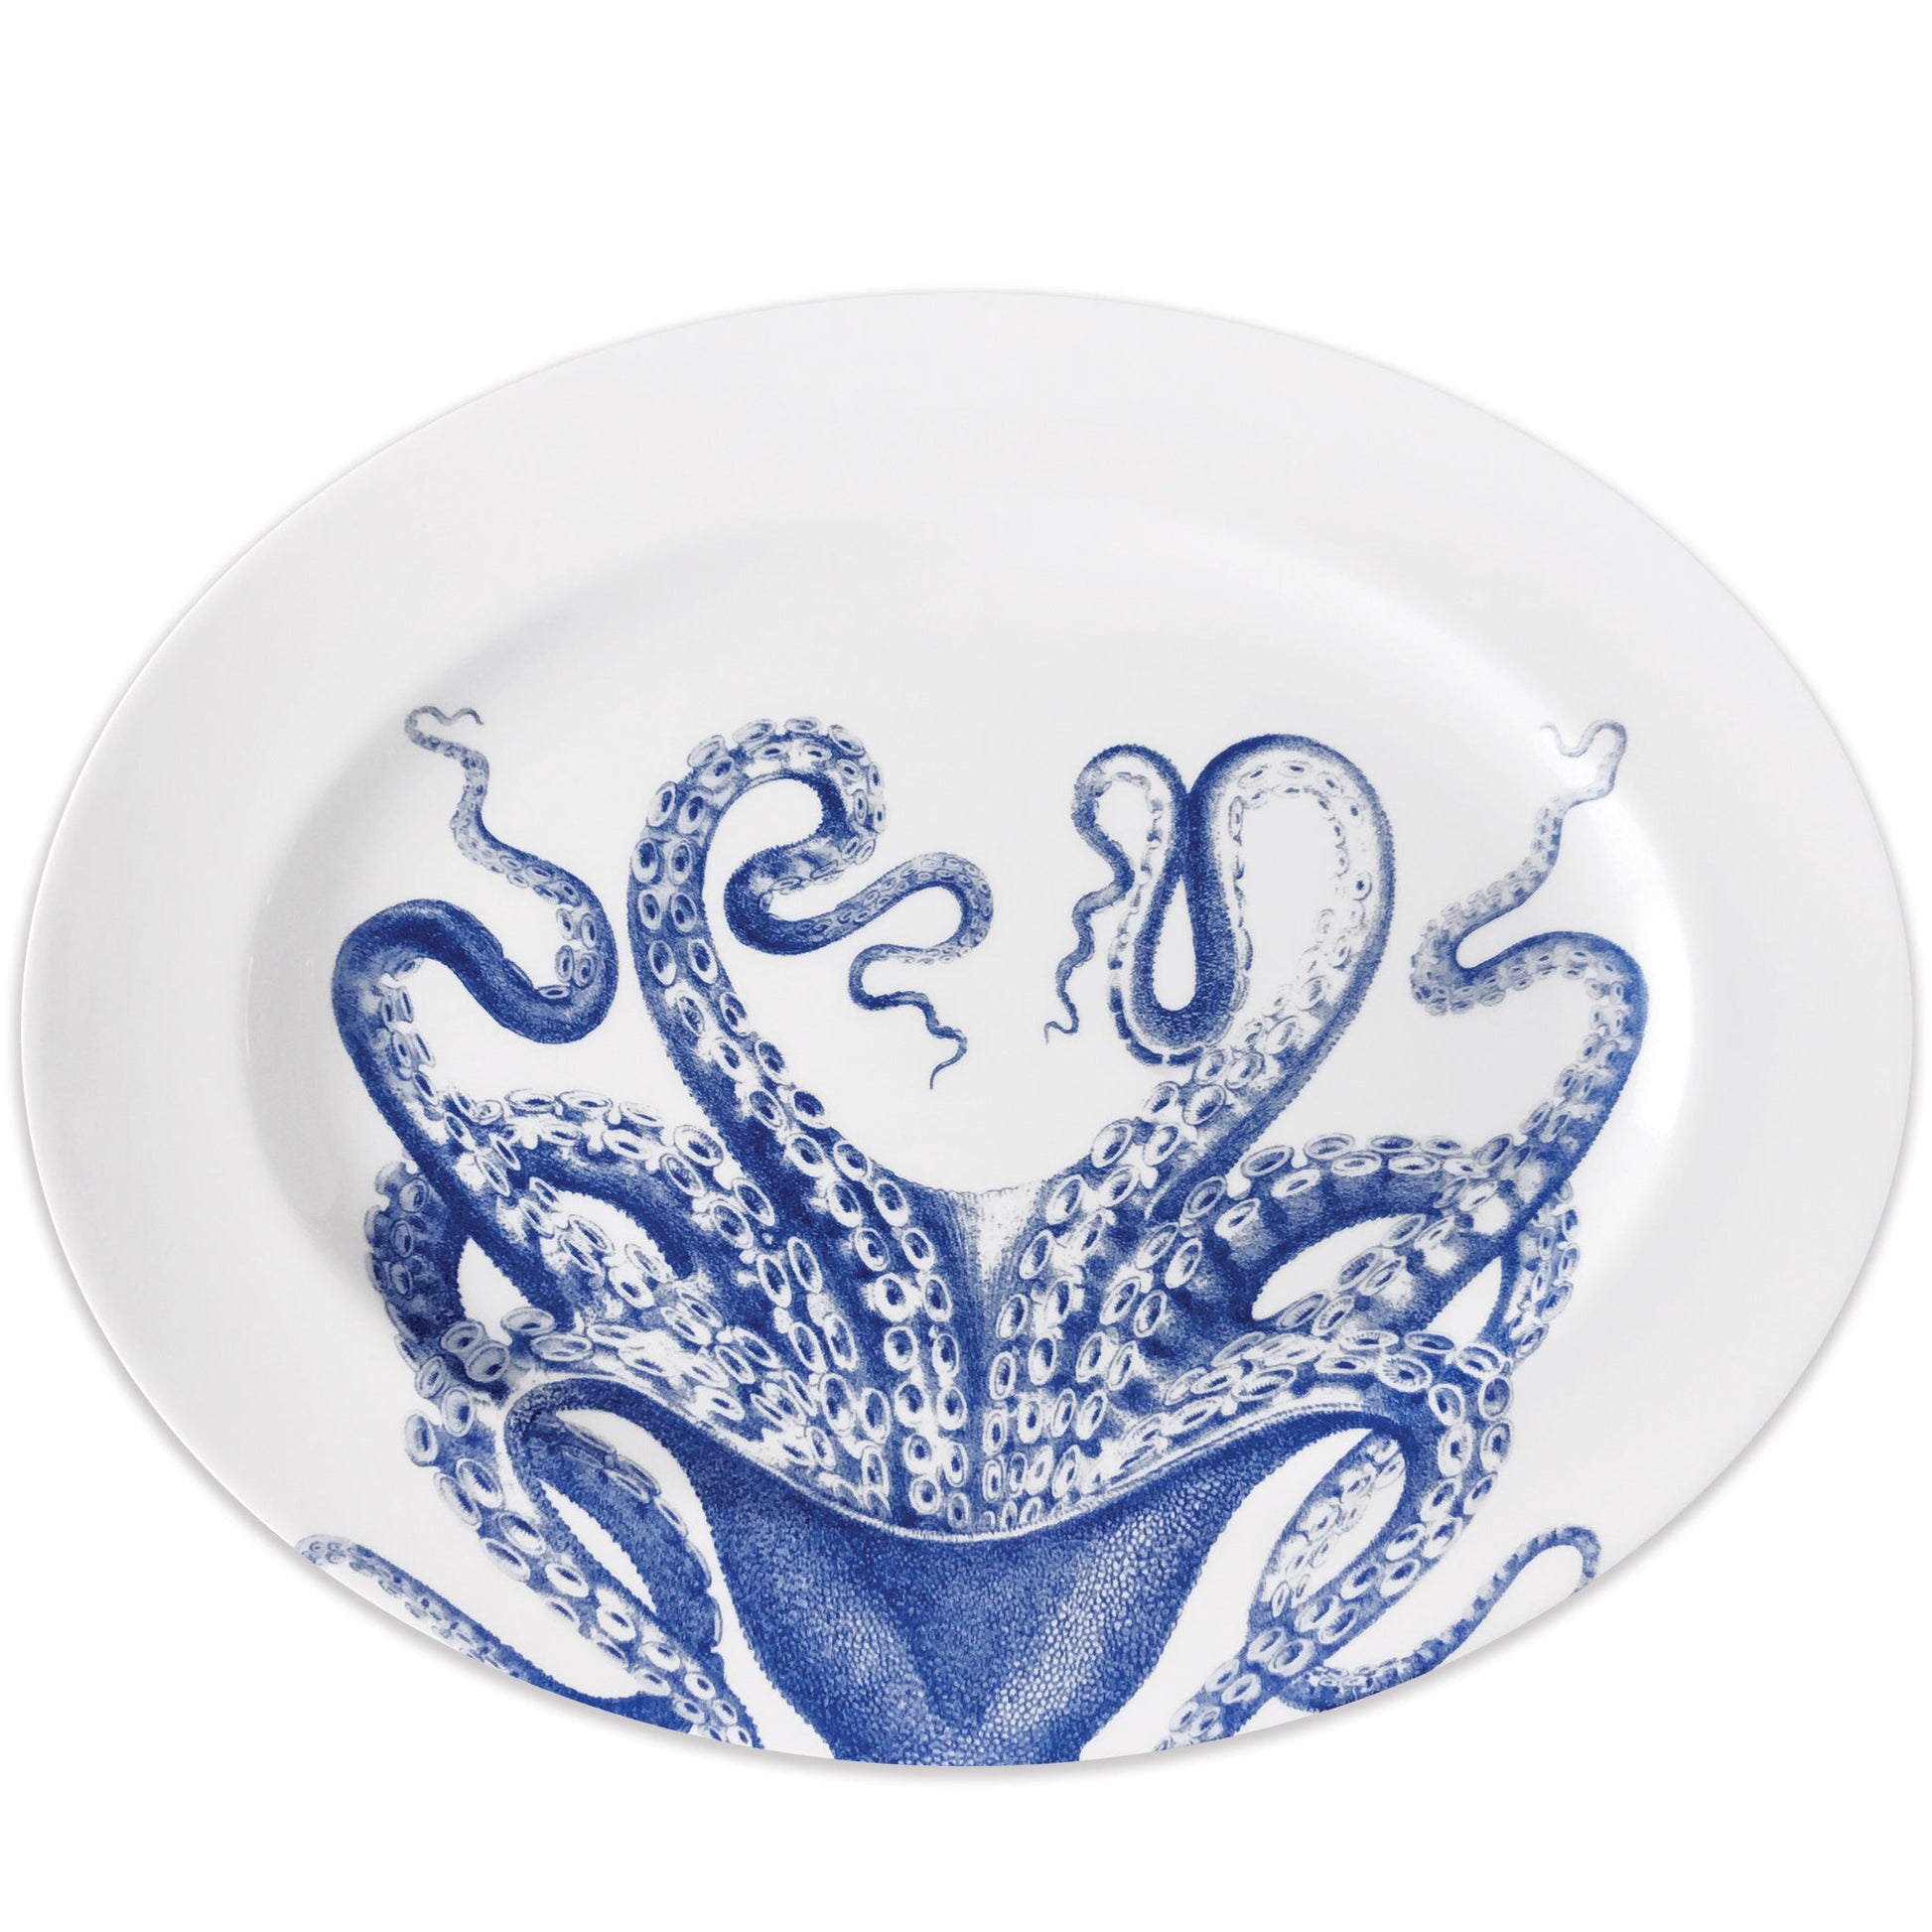 Octopus Large Oval Platter-Nautical Decor and Gifts